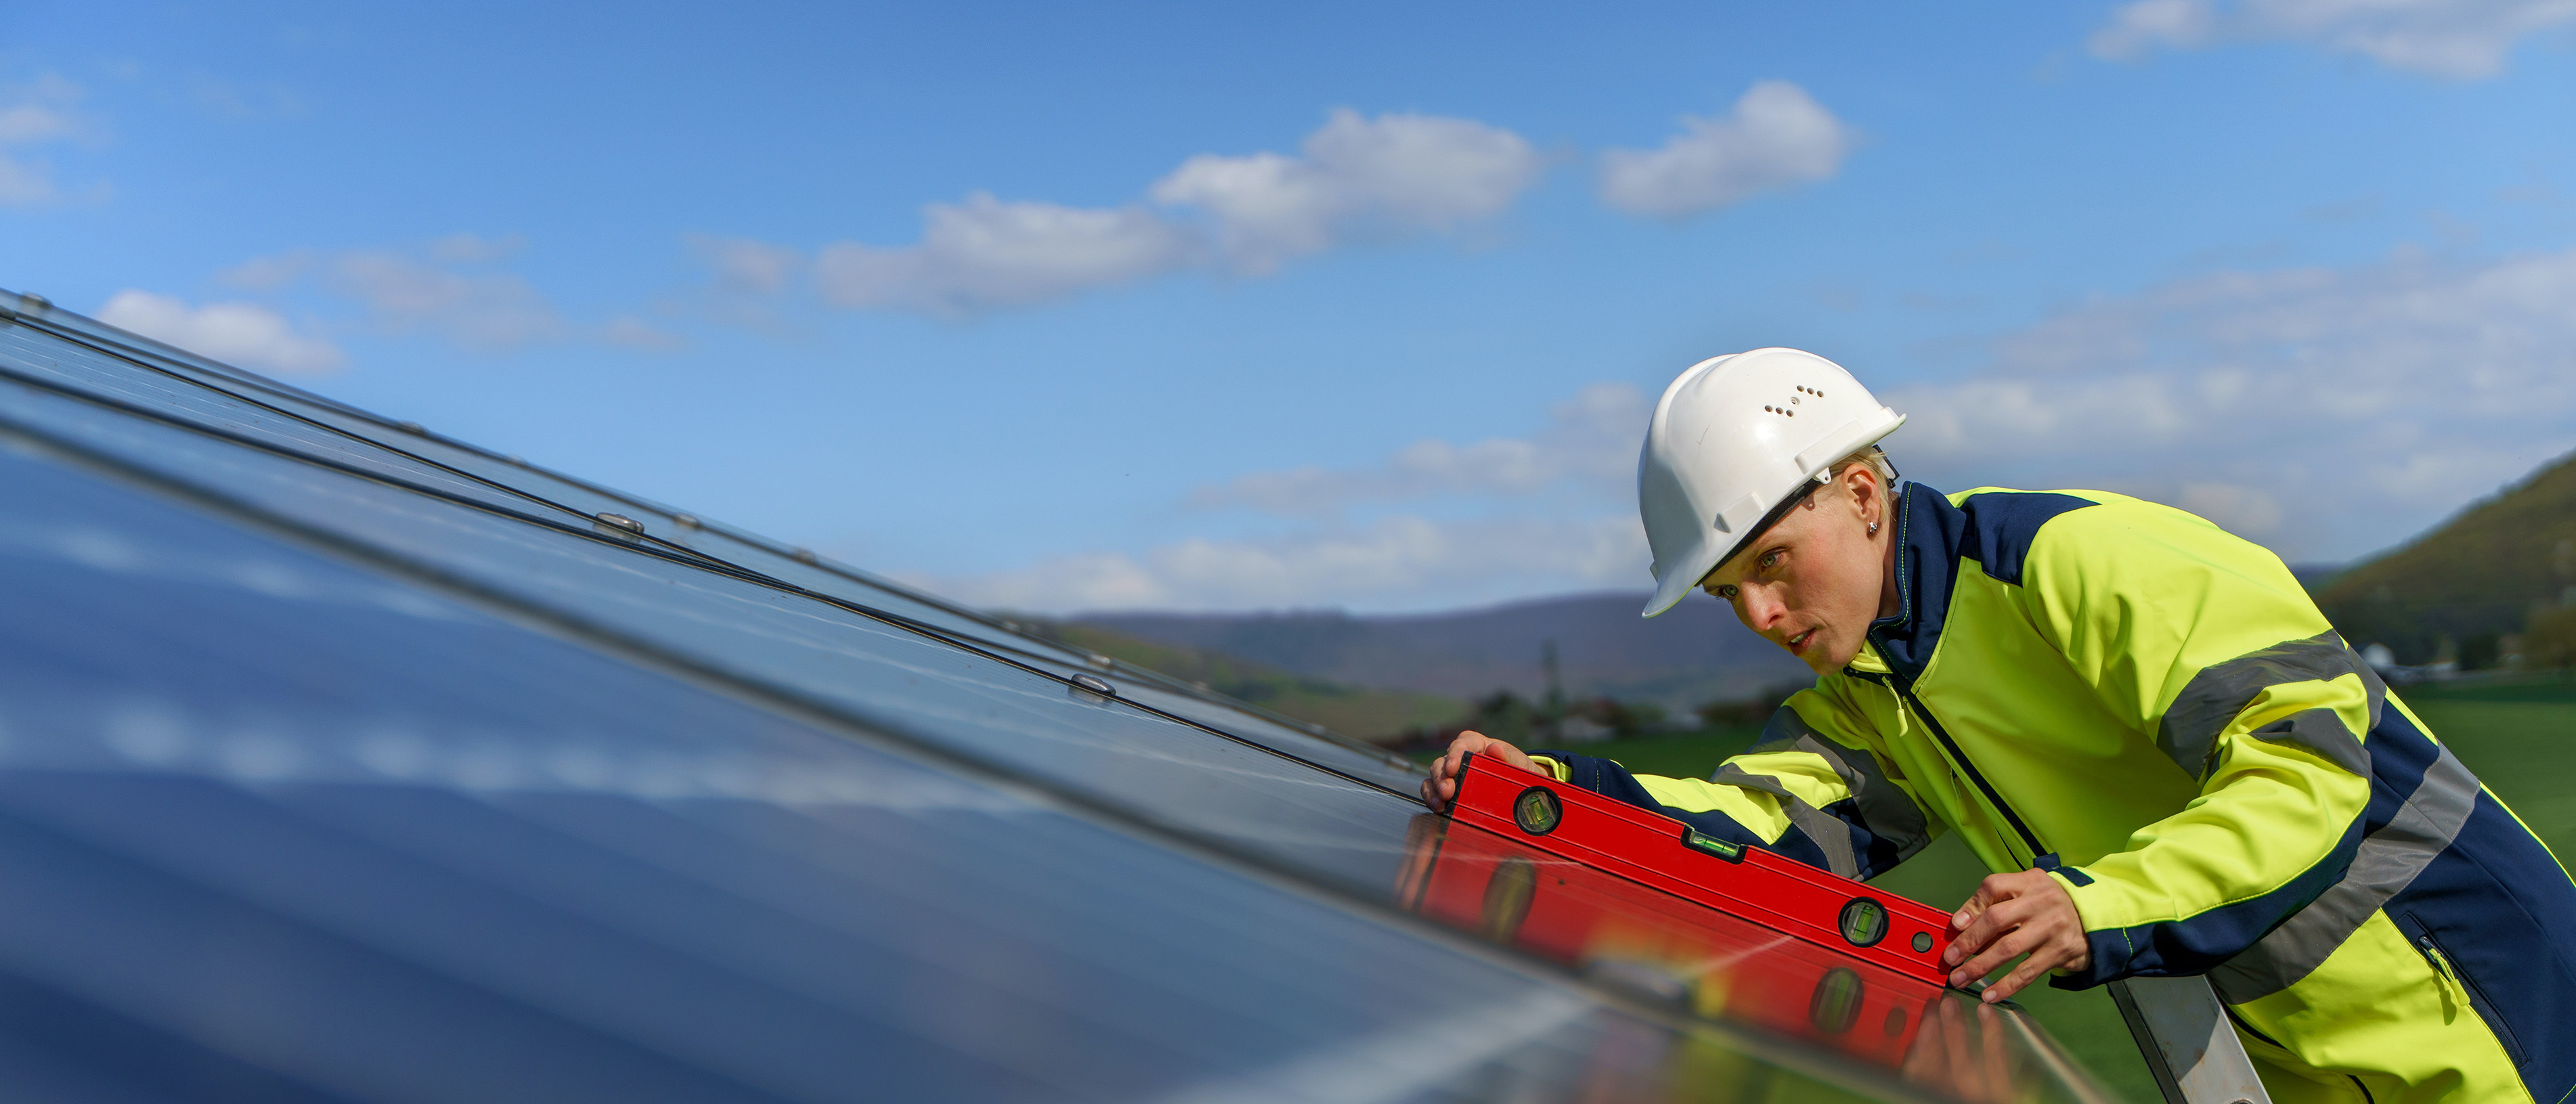 Considering a career switch or just starting out? The renewable energy sector is bursting with opportunities, and it's easier to get involved than you might think. Here's your step-by-step guide to powering your career with clean energy